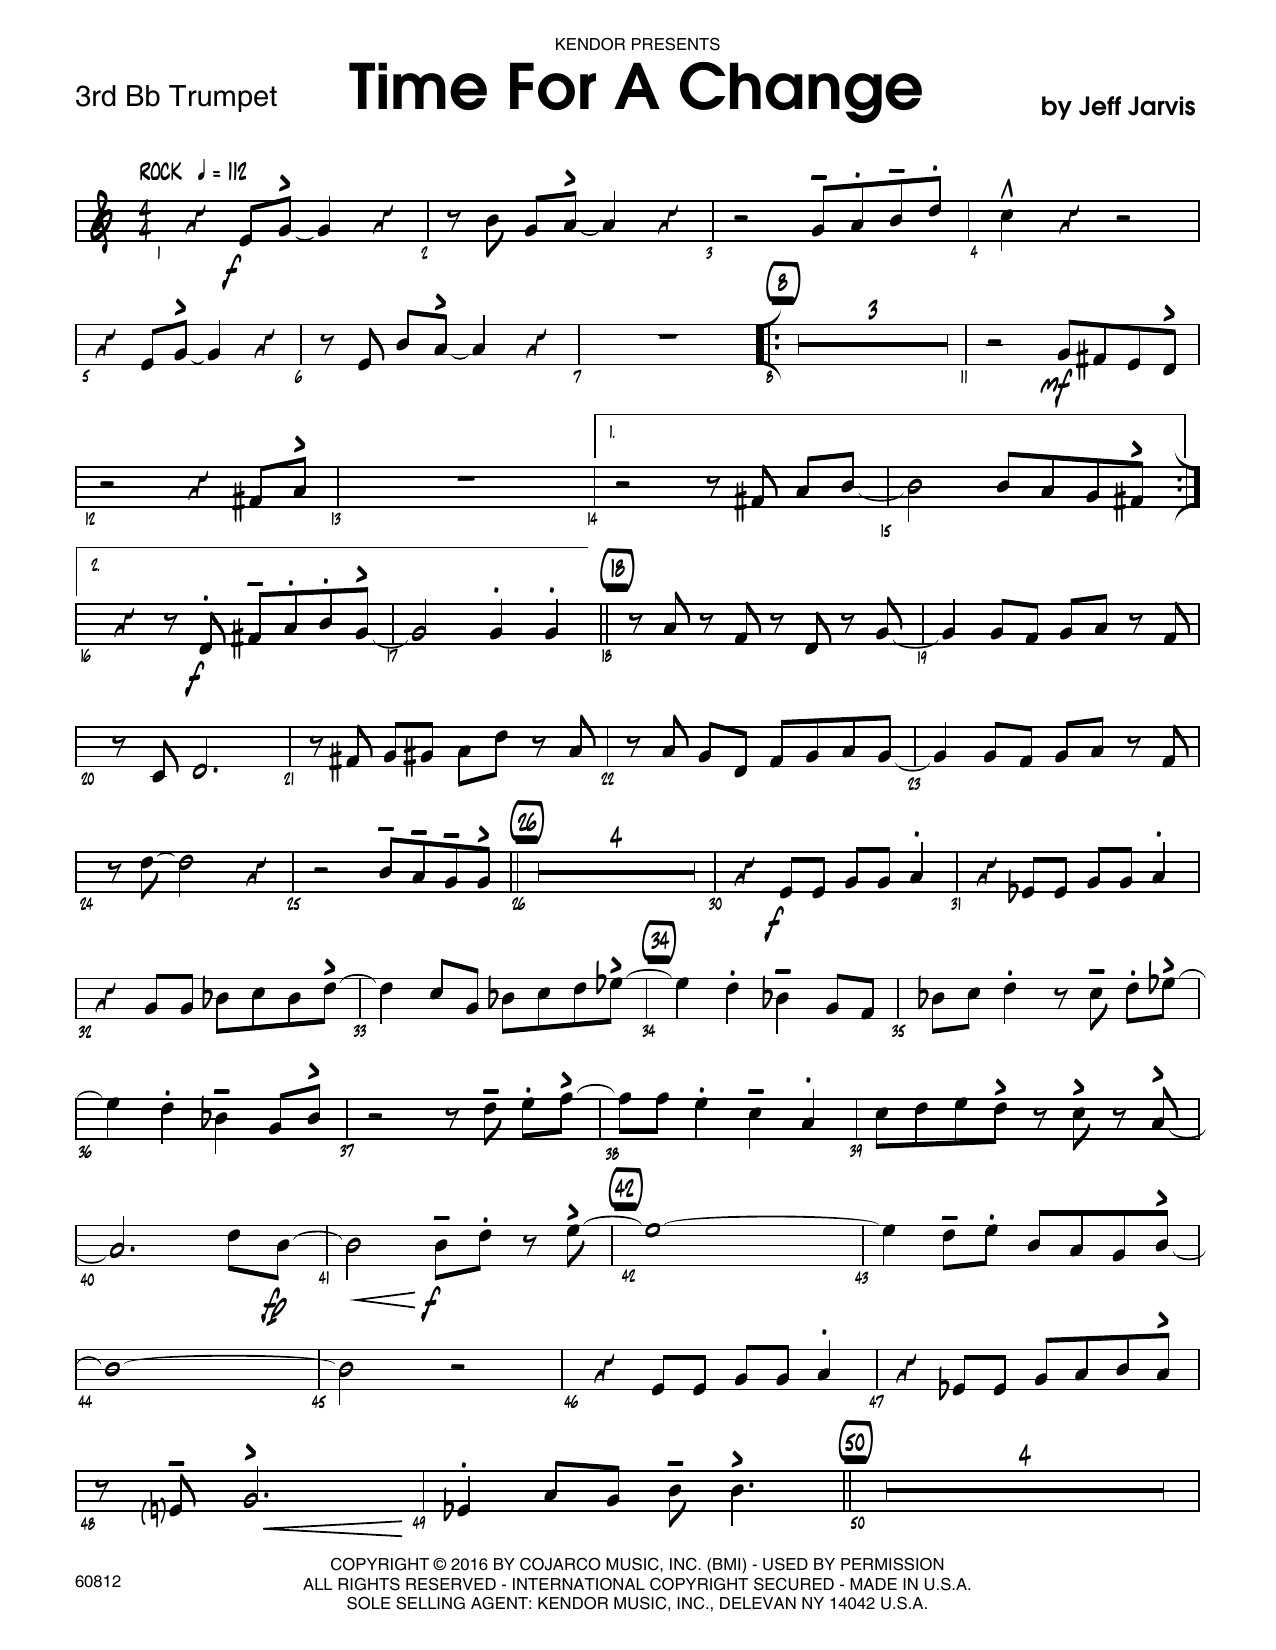 Download Jeff Jarvis Time For A Change - 3rd Bb Trumpet Sheet Music